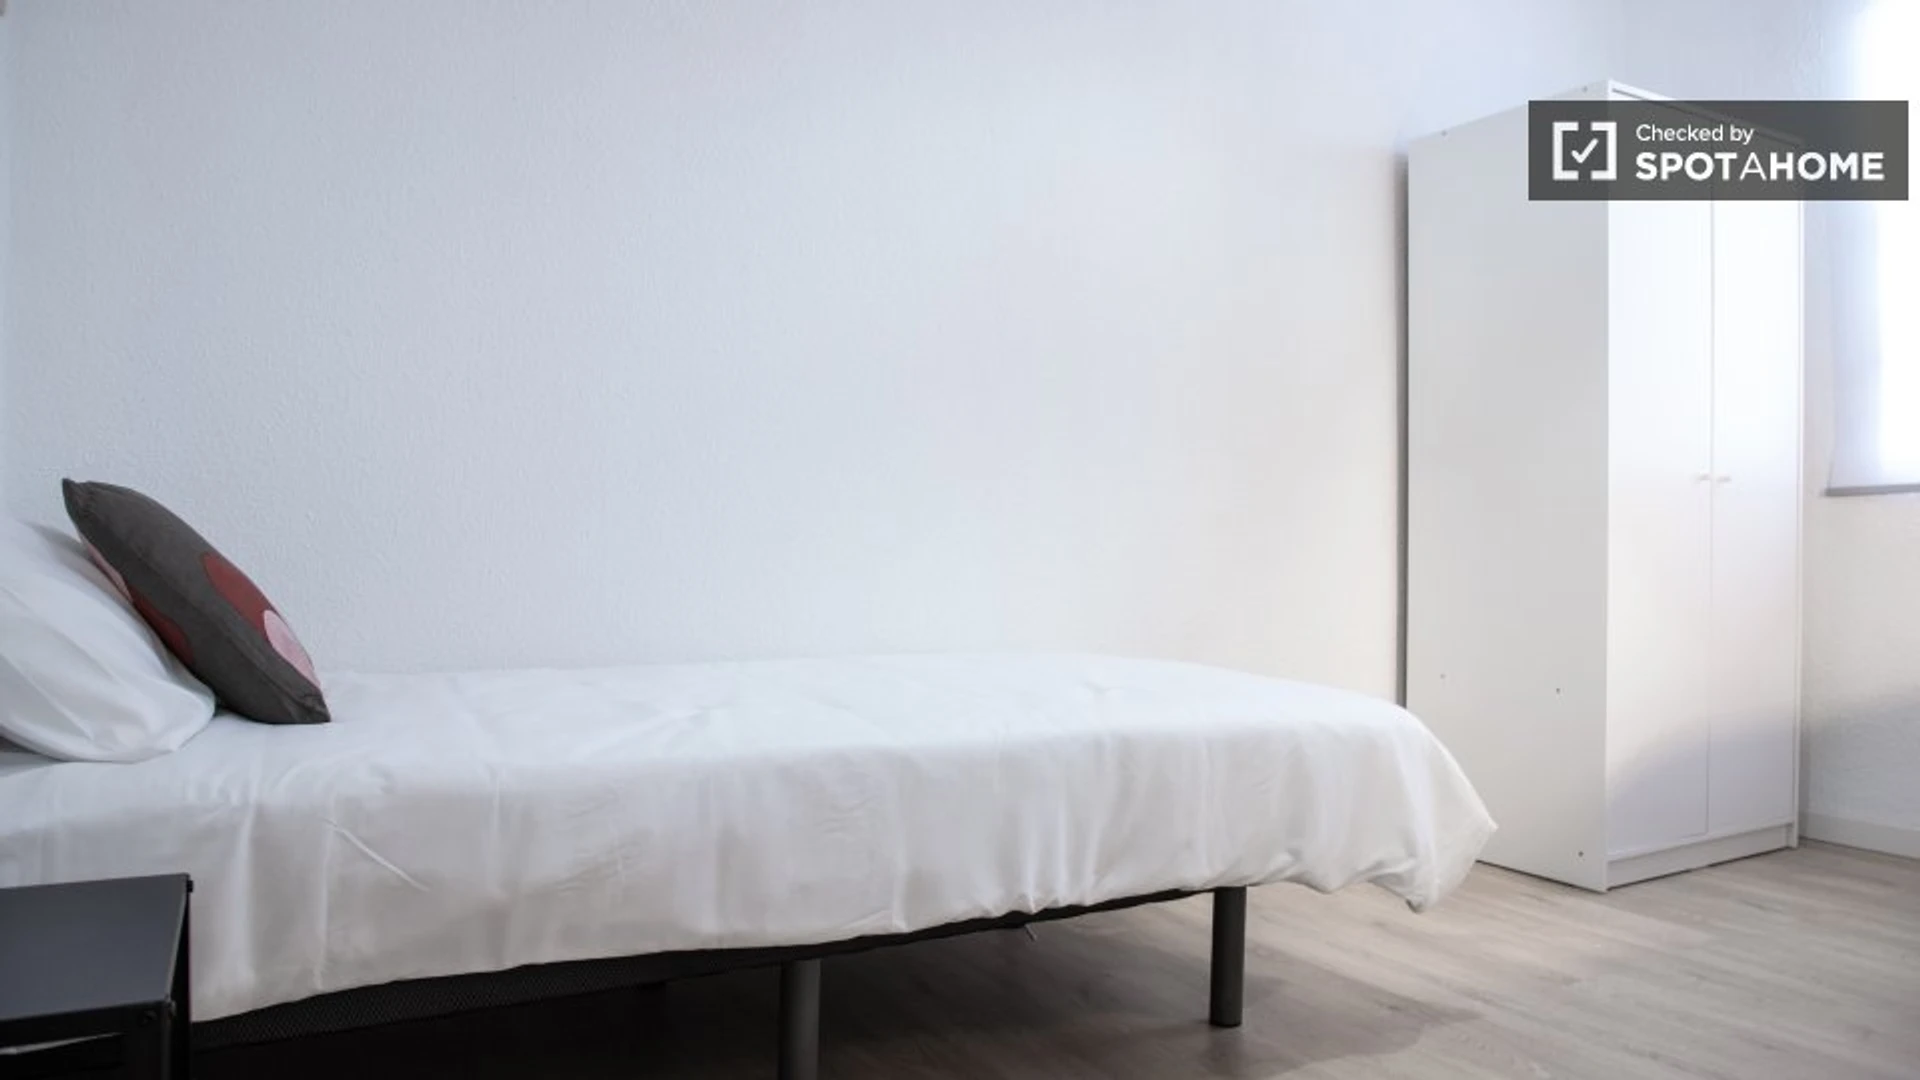 Cheap private room in Móstoles